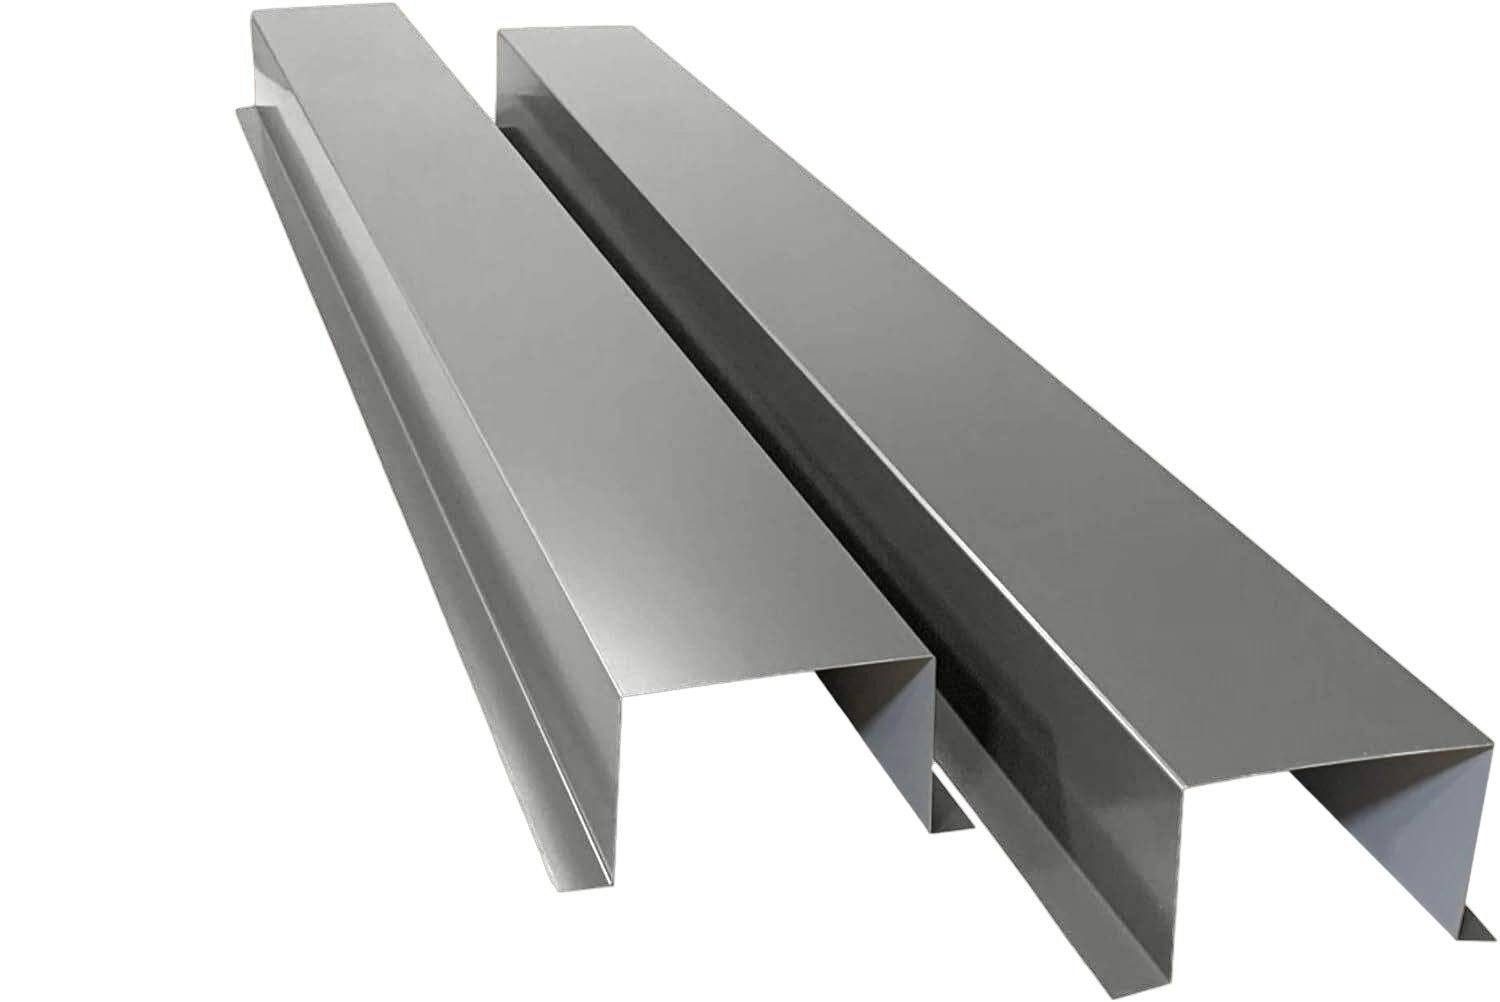 Two pieces of shiny, silver-colored metal channels with a U-shaped profile are placed side by side. The smooth surfaces and clean edges suggest they are part of the Perma Cover Commercial Series - 24 Gauge Painted Metal HVAC Line Set Covers - Heavy Duty, Multiple Sizes & Colors for reliable HVAC line protection in construction or manufacturing applications.